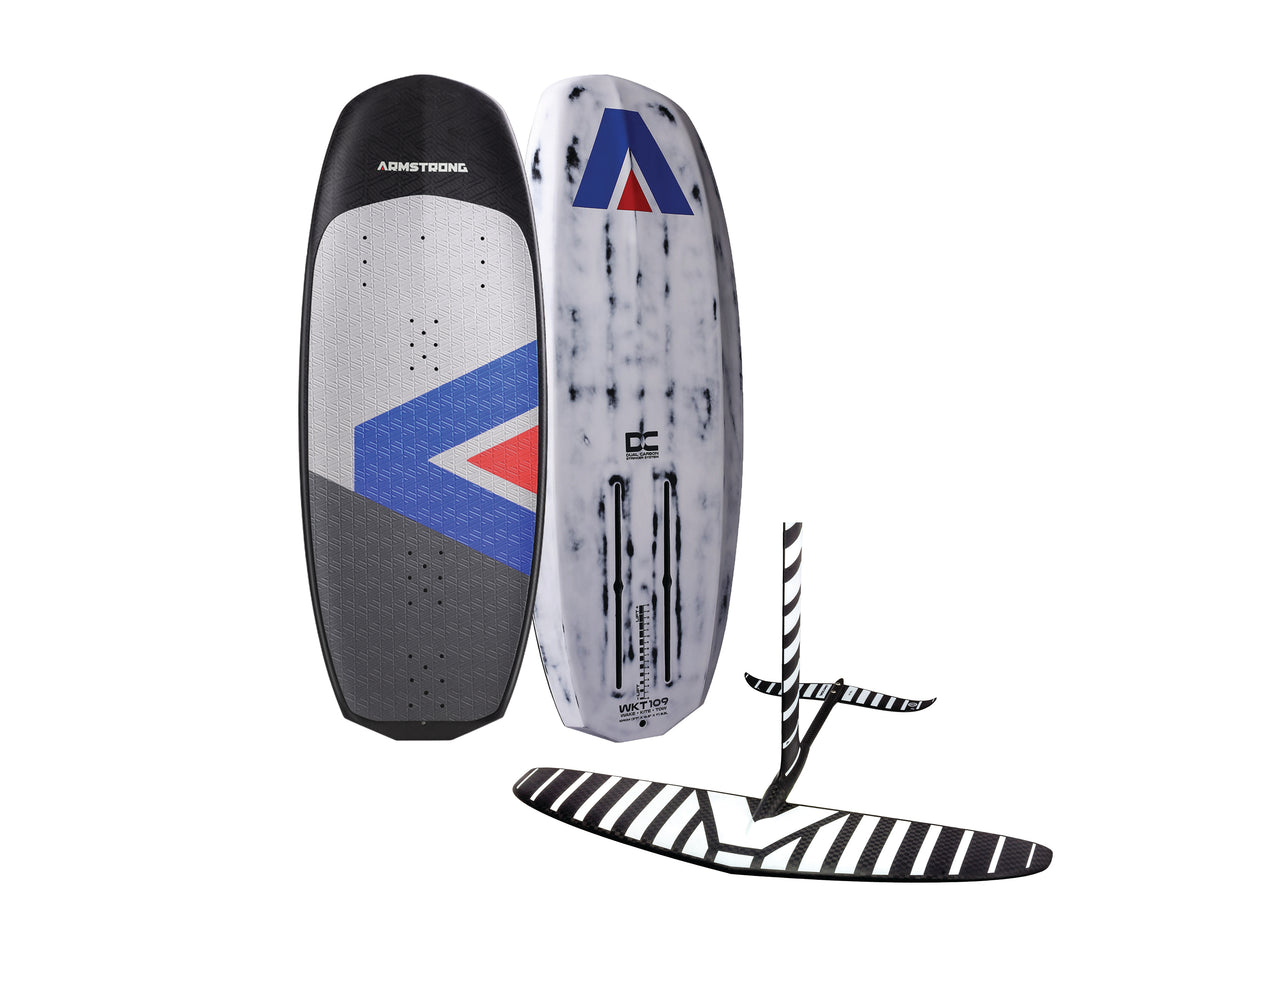 Armstrong Wakefoil Board W/ Armstrong HS1850 Foil Kit Package